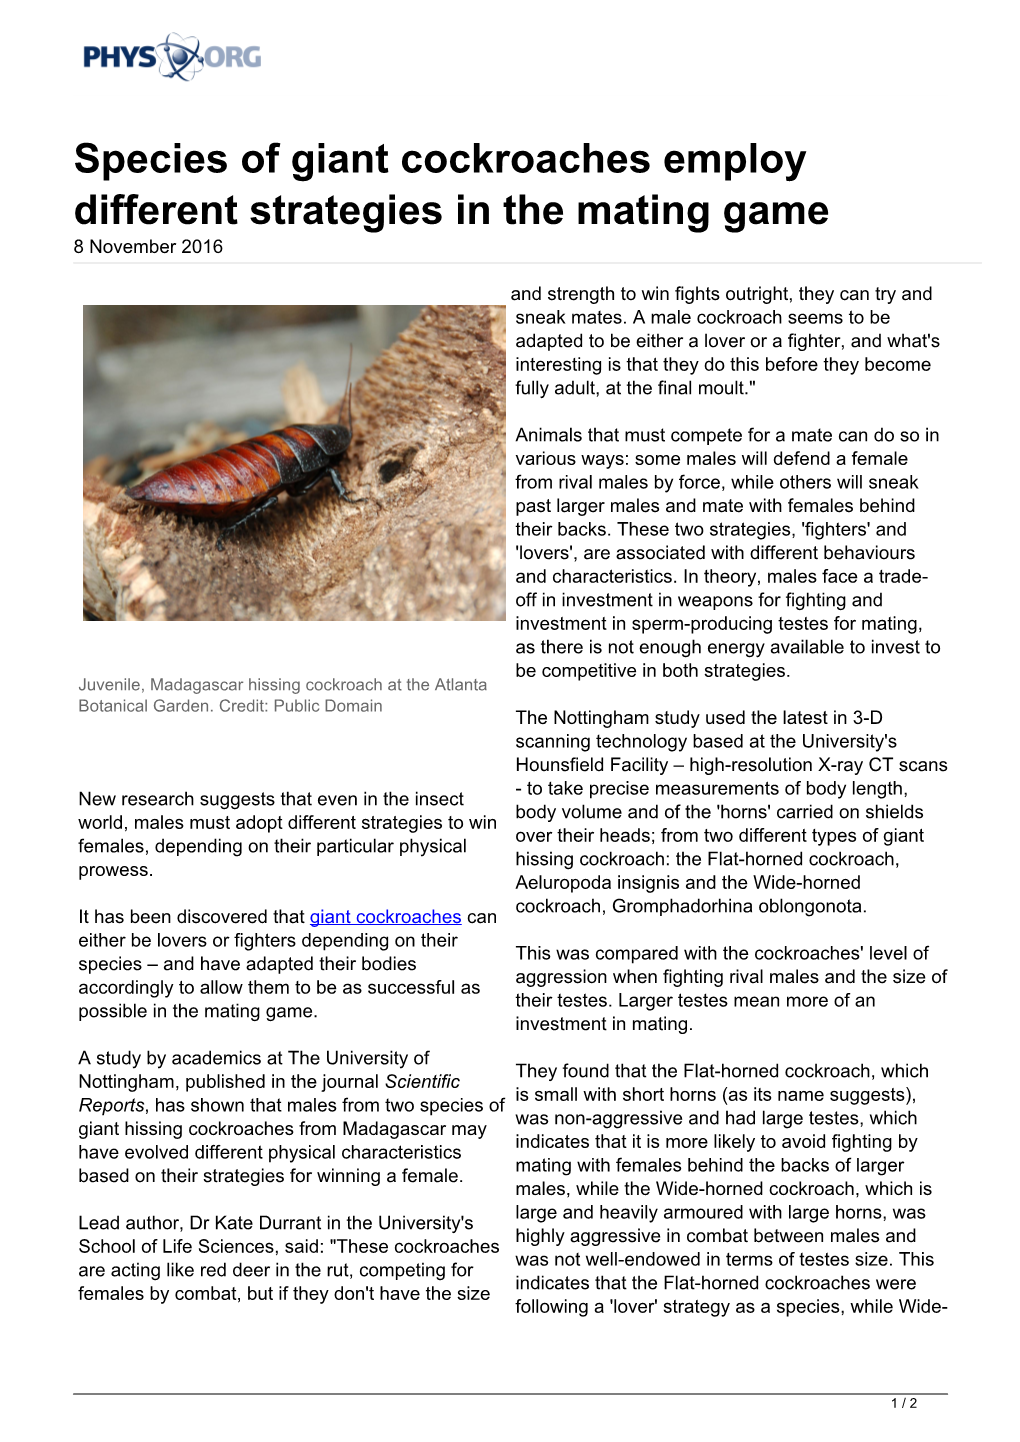 Species of Giant Cockroaches Employ Different Strategies in the Mating Game 8 November 2016